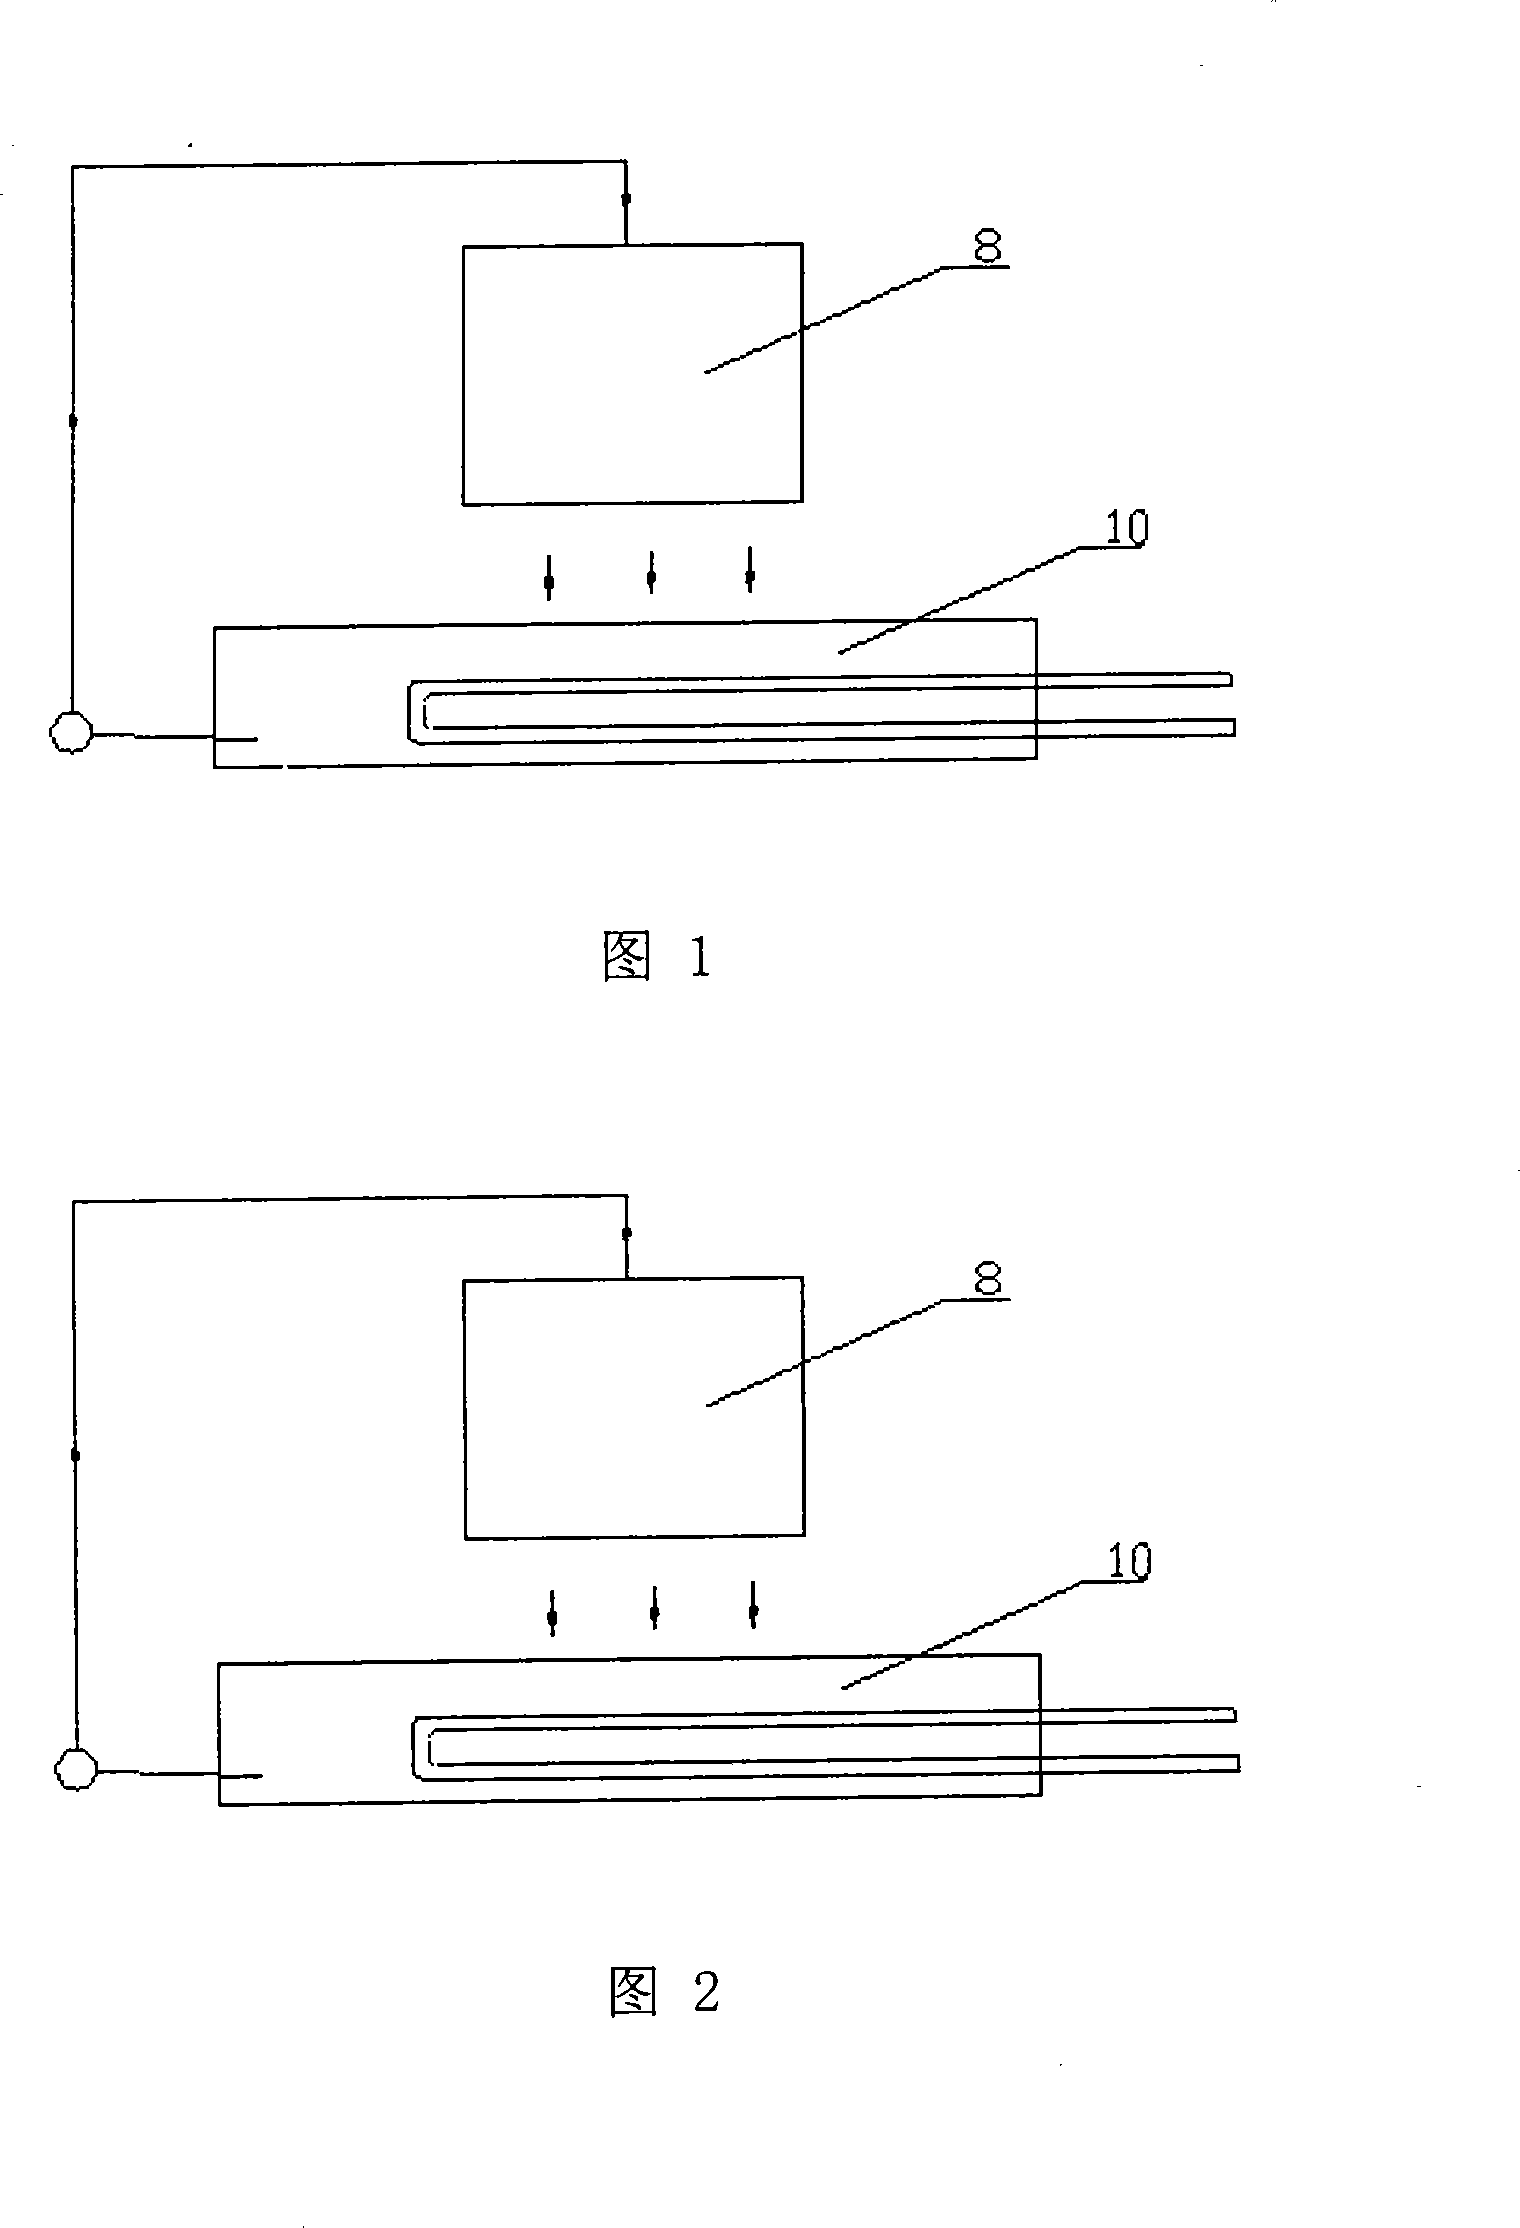 Integrated performance test method for vaporization cooling in various heat exchange models and modes